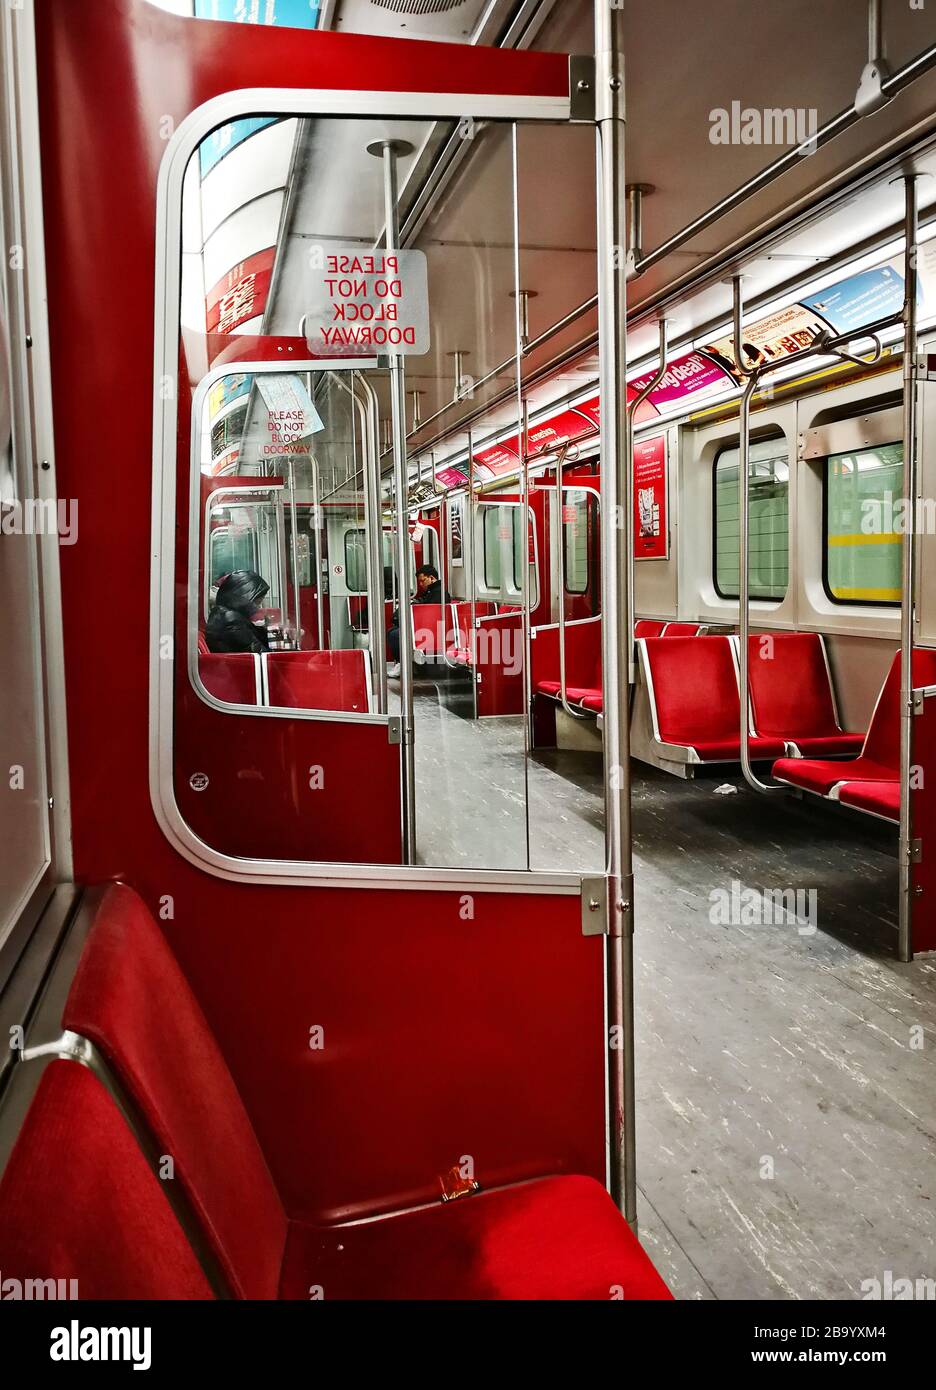 Few people riding near empty TTC subway train and keeping social distancing in Toronto during Covid-19 a.k.a. novel coronarirus pandemic on March 24, 2020. State of emergency for the city Stock Photo